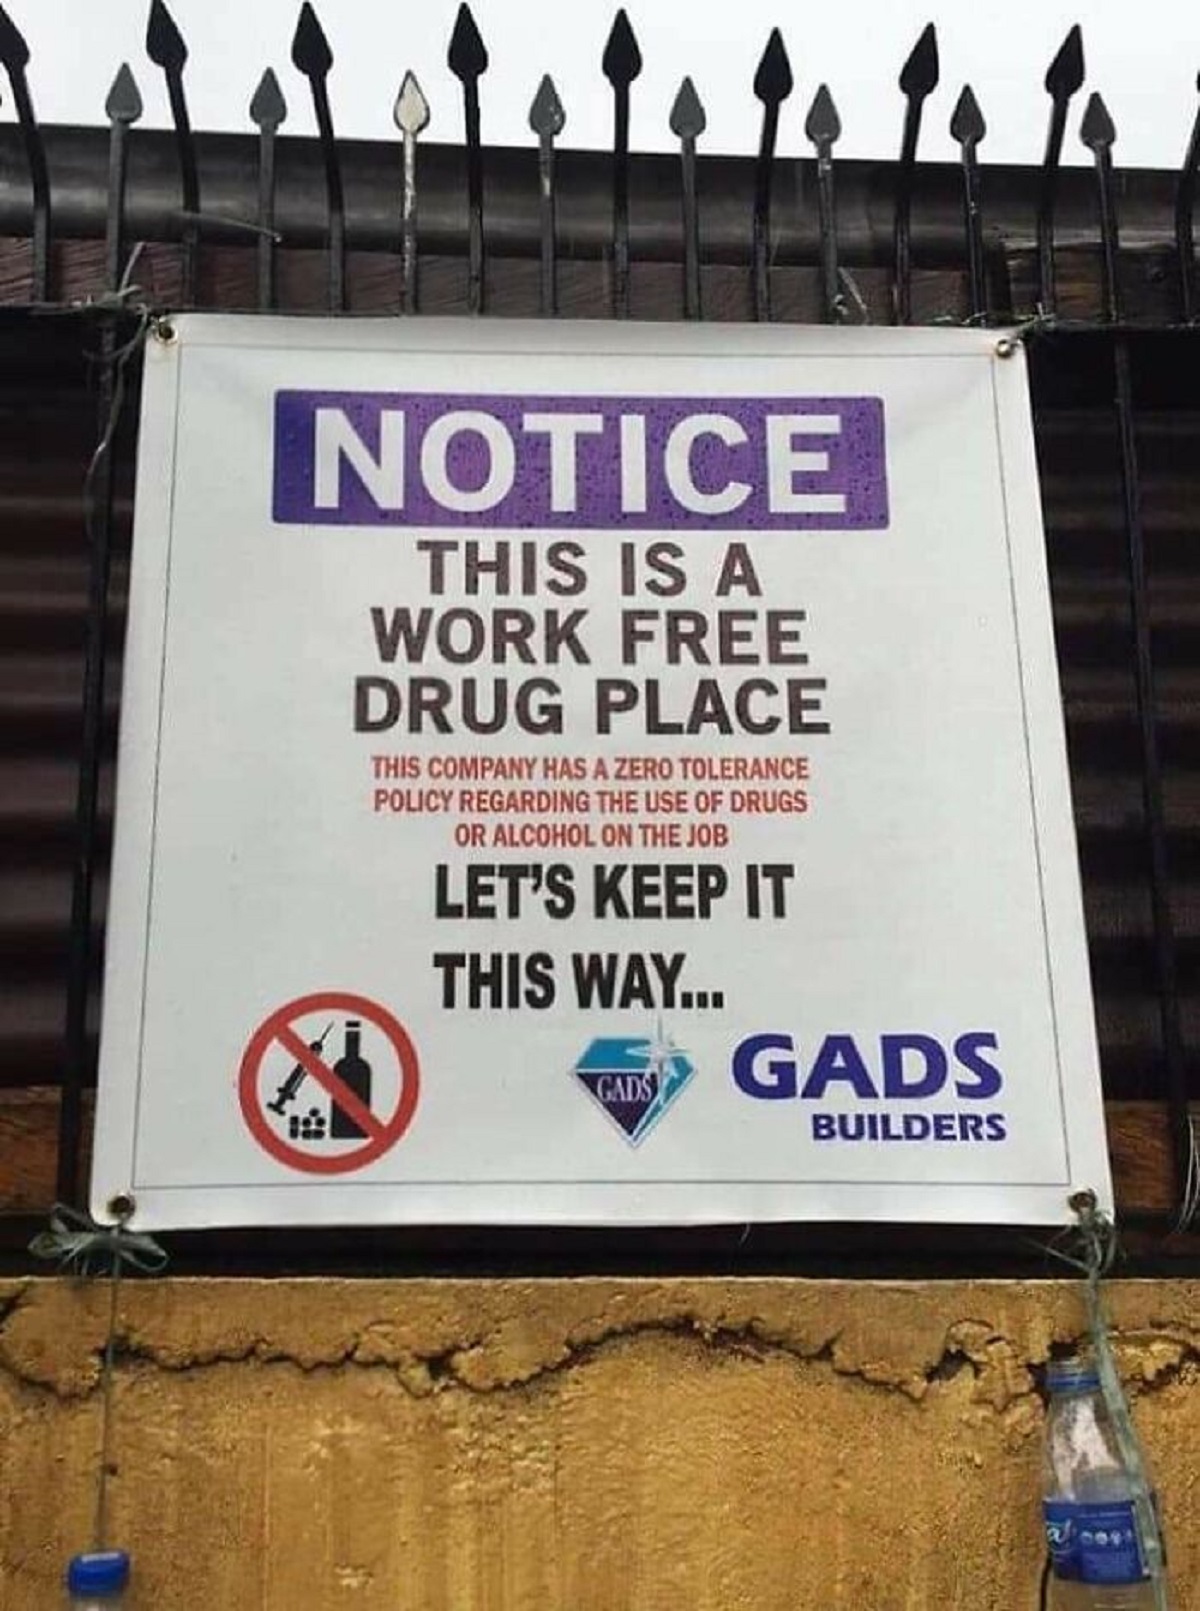 sign design fails - Notice This Is A Work Free Drug Place This Company Has A Zero Tolerance Policy Regarding The Use Of Drugs Or Alcohol On The Job Let'S Keep It This Way... Cads Gads Builders